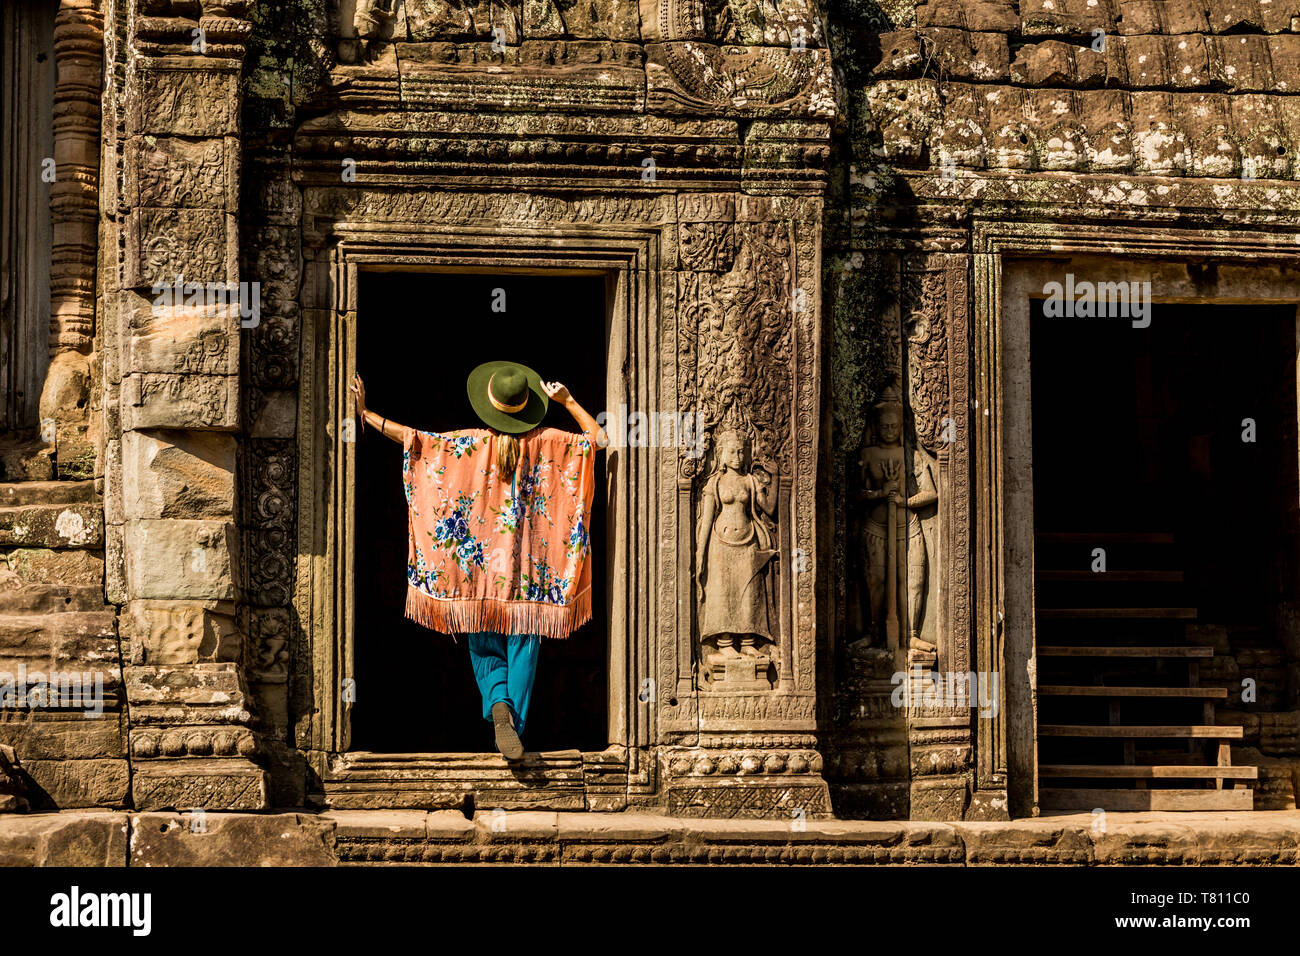 American woman tourist at Angkor Wat temples, Angkor, UNESCO World Heritage Site, Siem Reap, Cambodia, Indochina, Southeast Asia, Asia Stock Photo